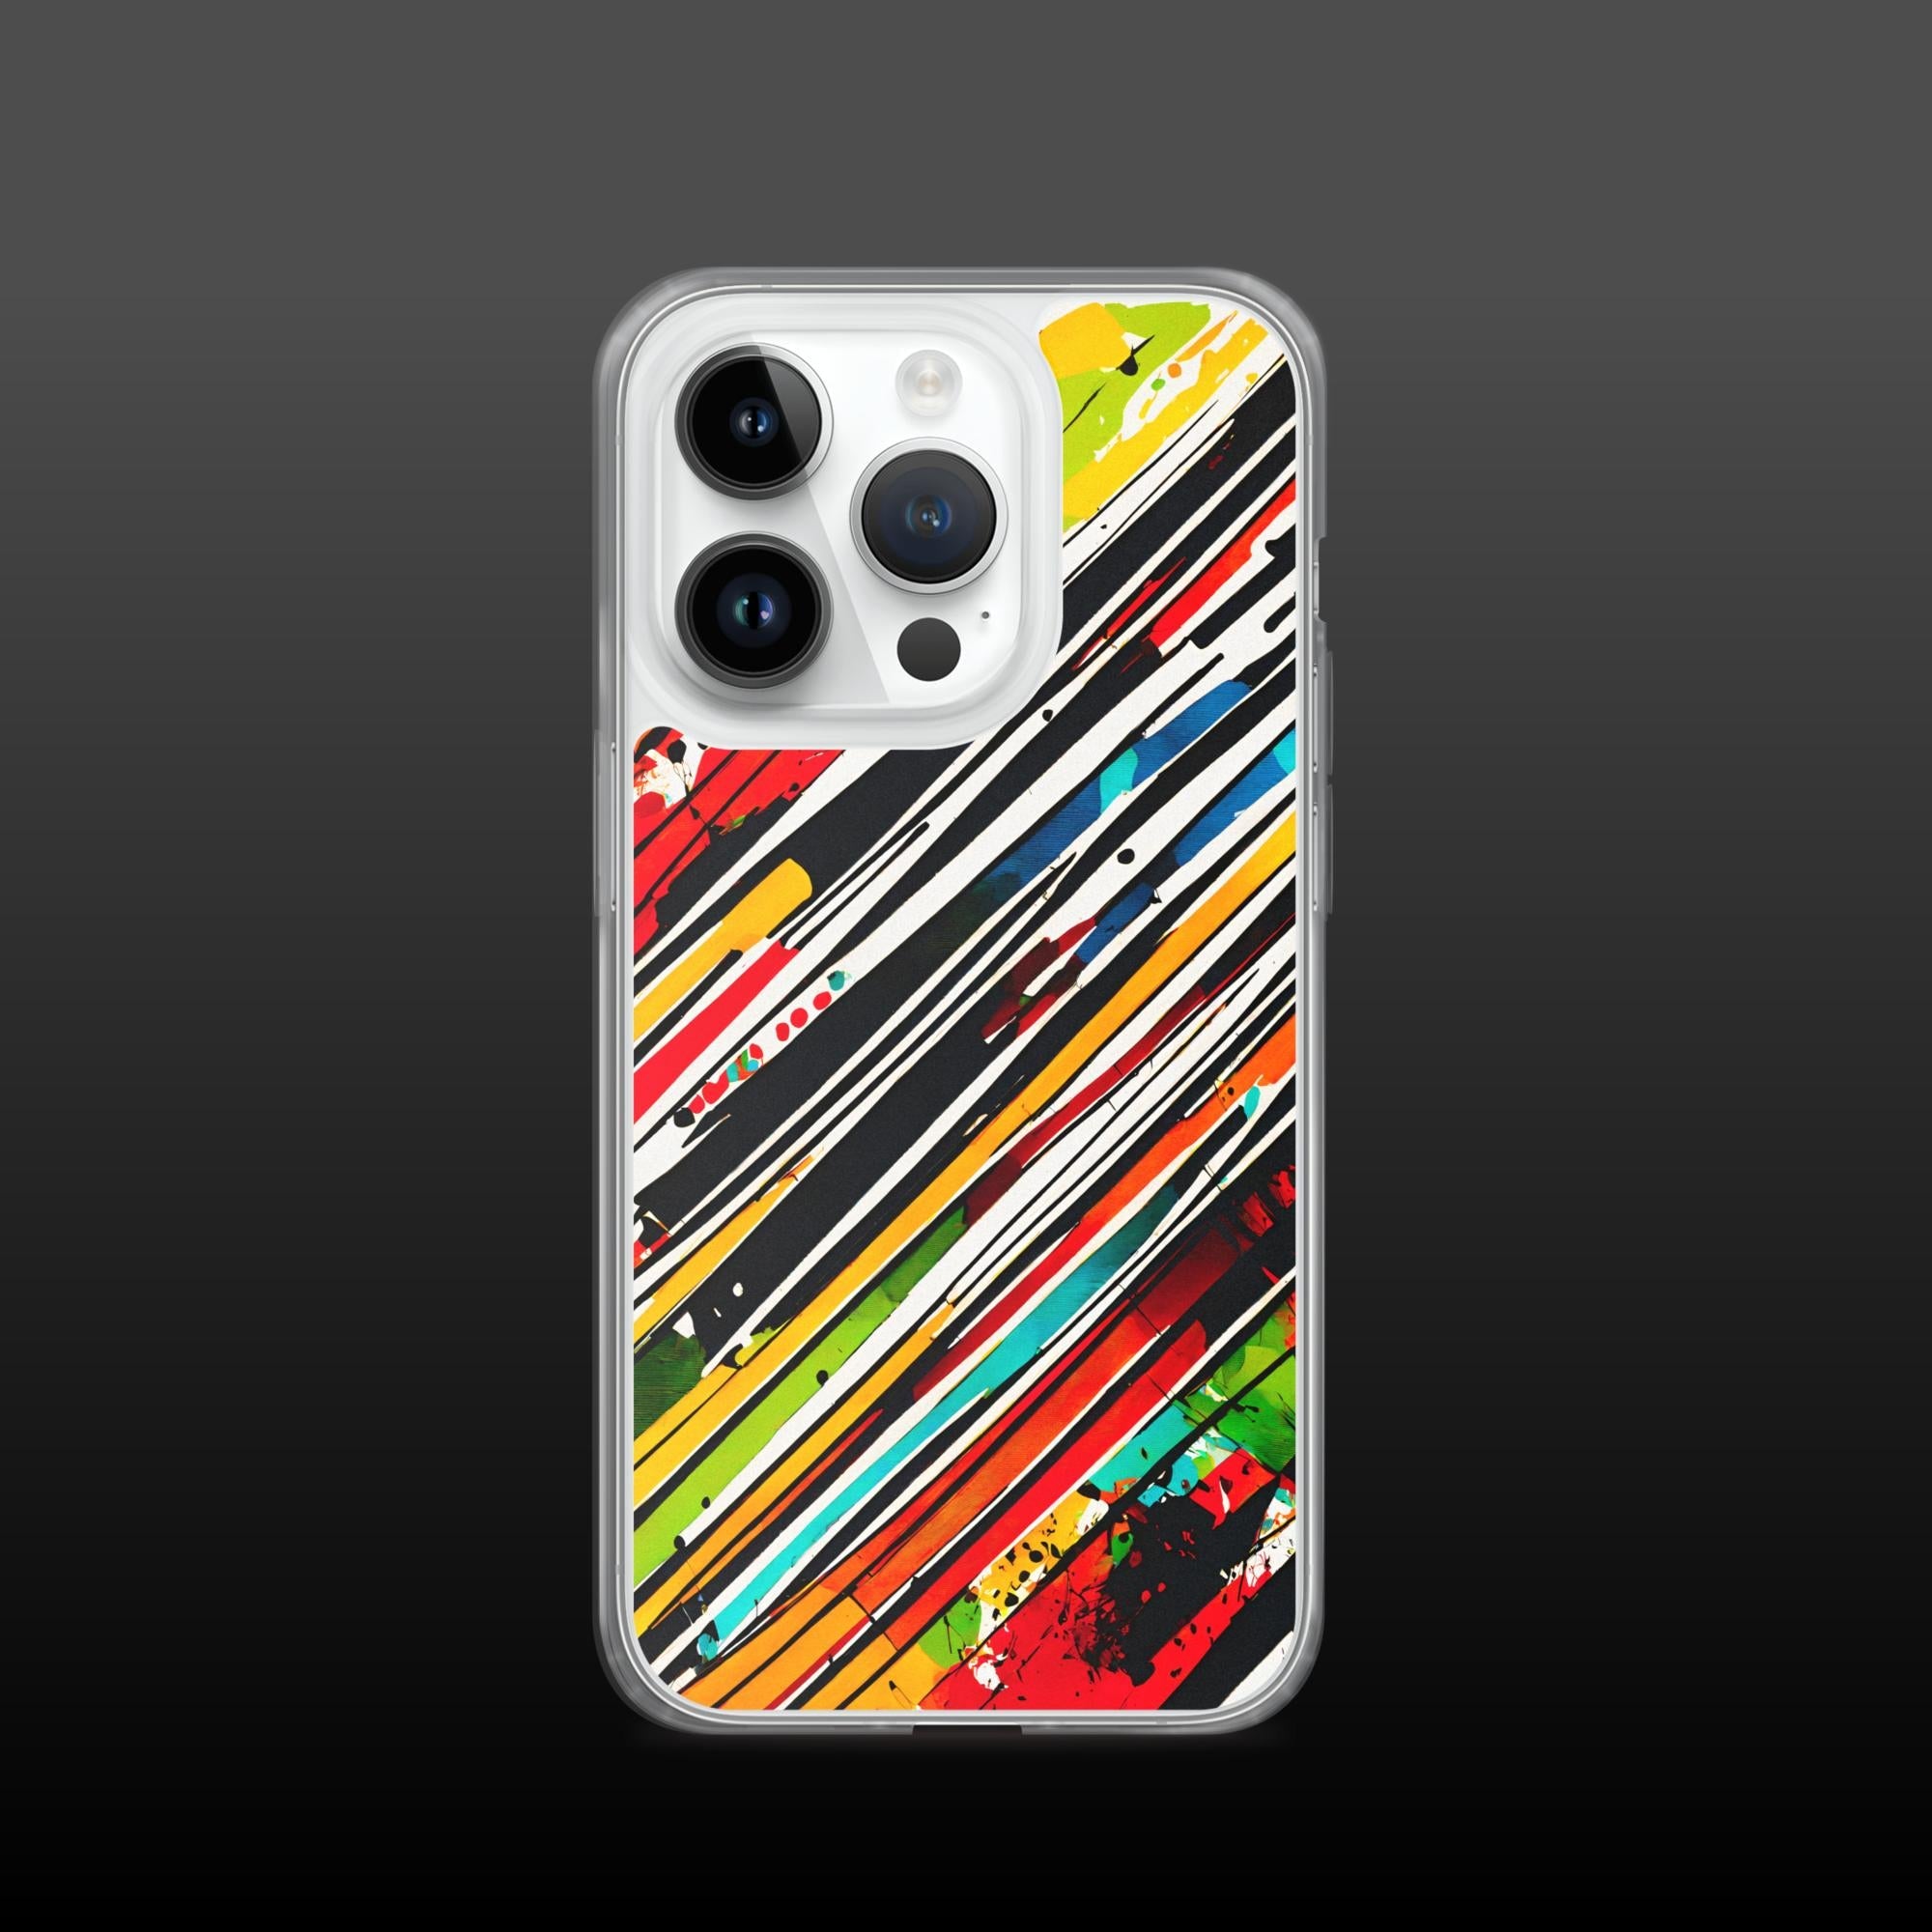 "Look closer" clear iphone case - Clear iphone case - Ever colorful